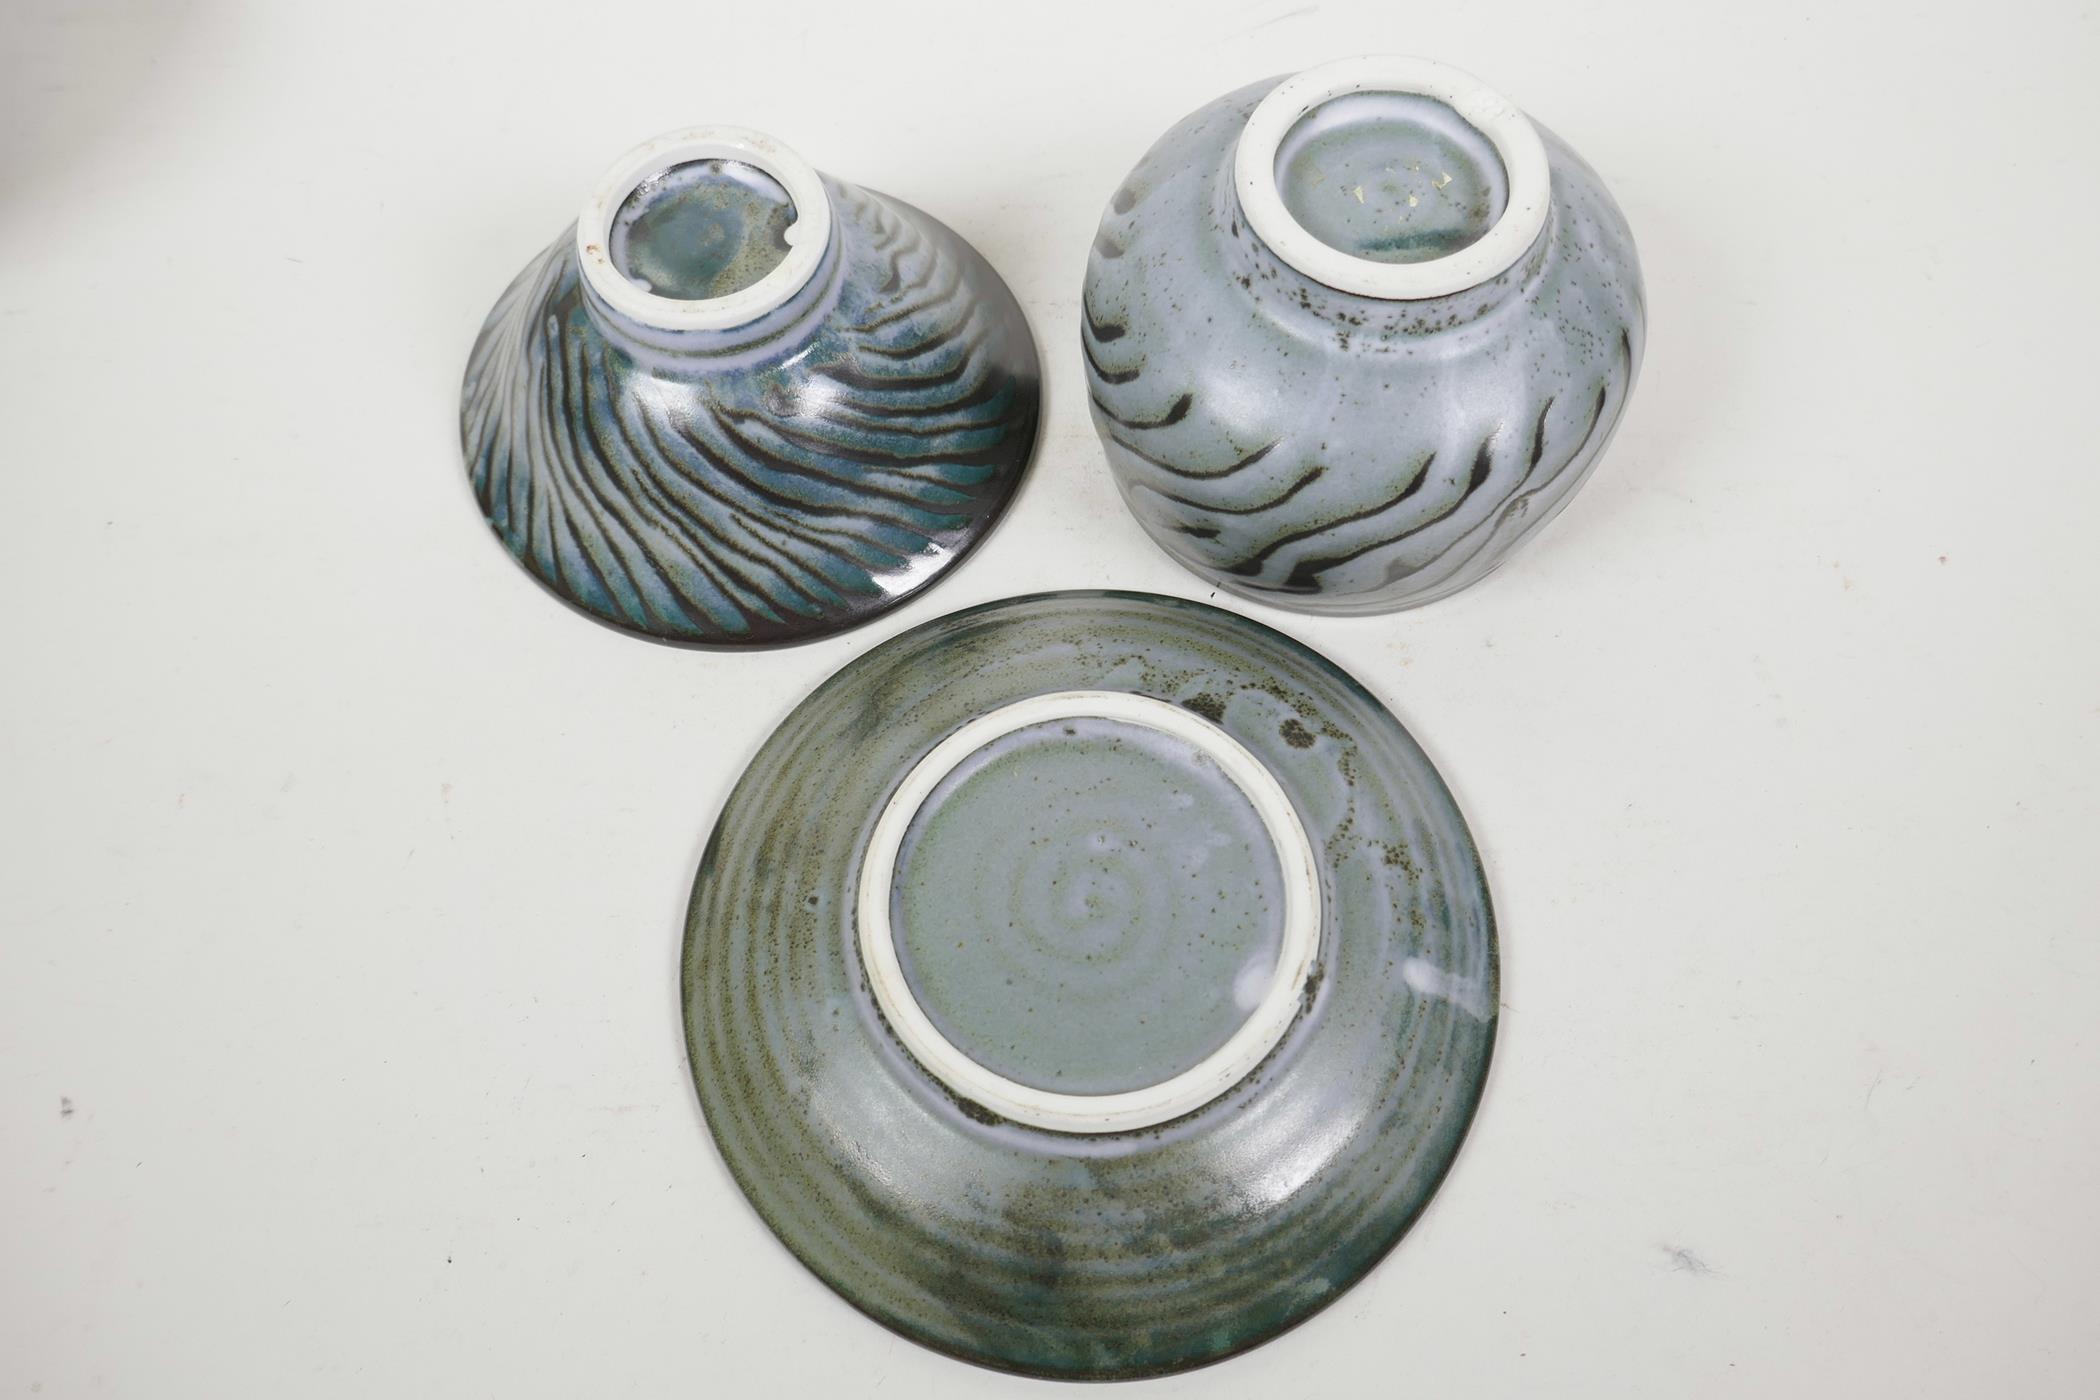 Studio pottery, two bowls and a shallow dish, slip glazed in grey/blue and brown, dish 6½" diameter - Image 5 of 5